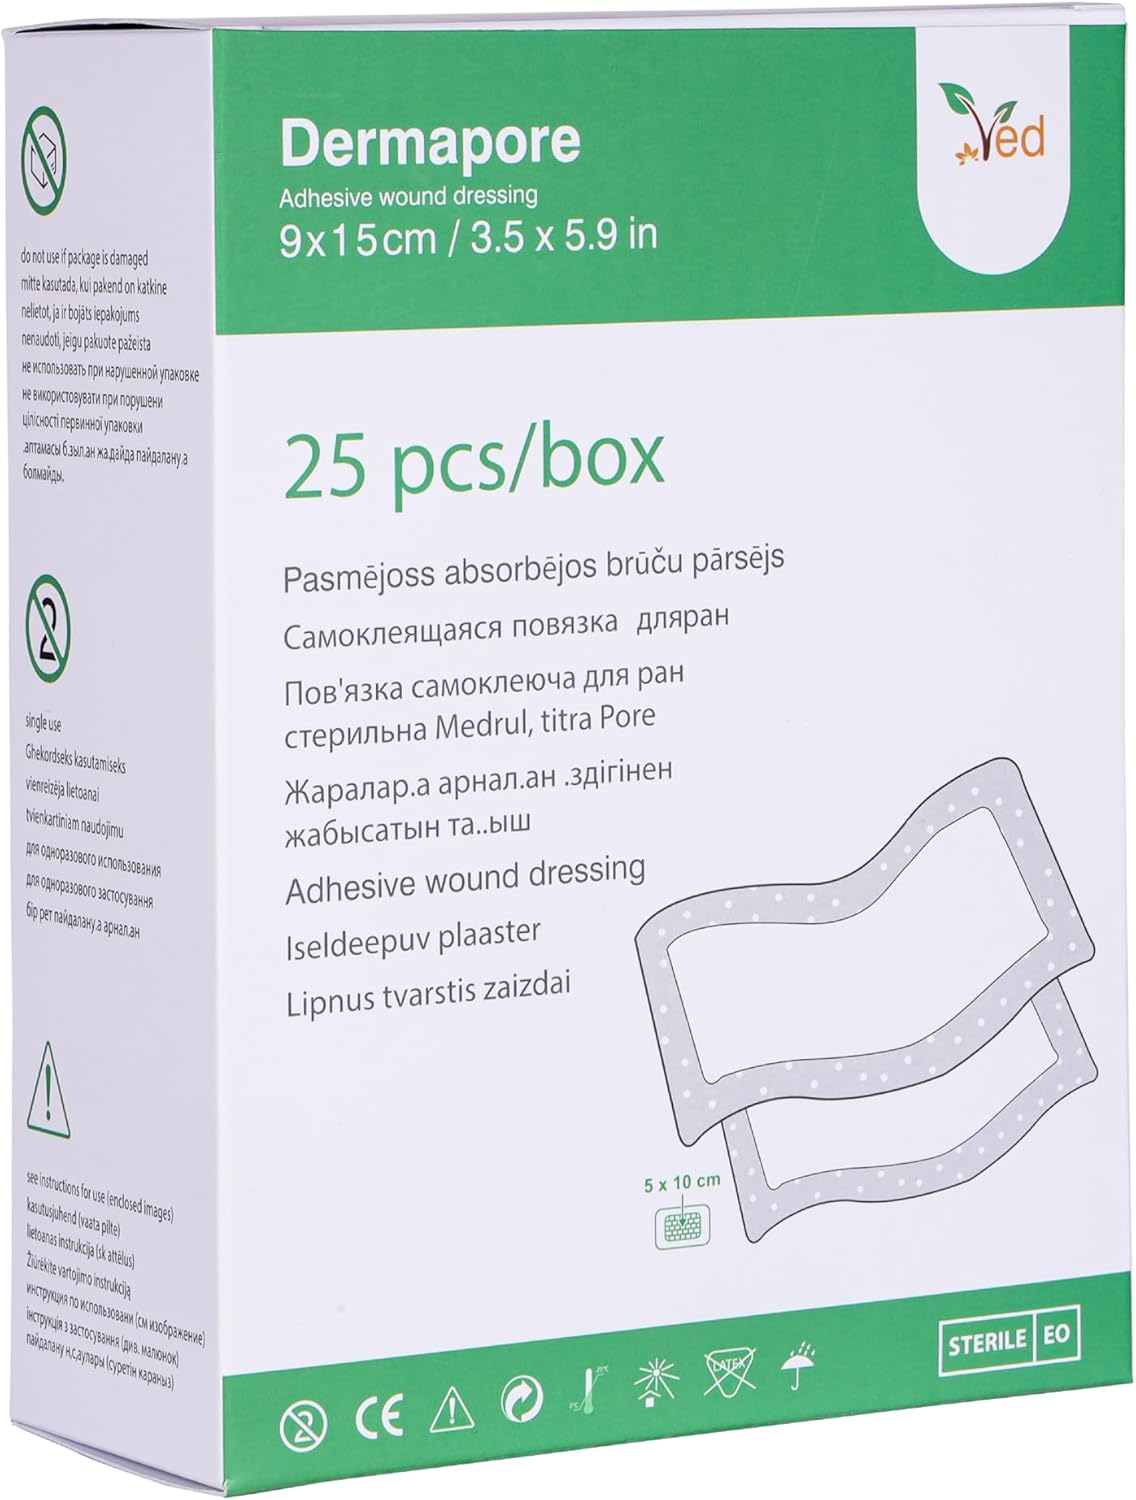 VED Dermapore Adhesive Wound Dressing- Suitable for cuts and grazes, Diabetic Leg ulcers, venous Leg ulcers, Small Pressure sores- Medium, 9 X 15cm (Pack of 25).